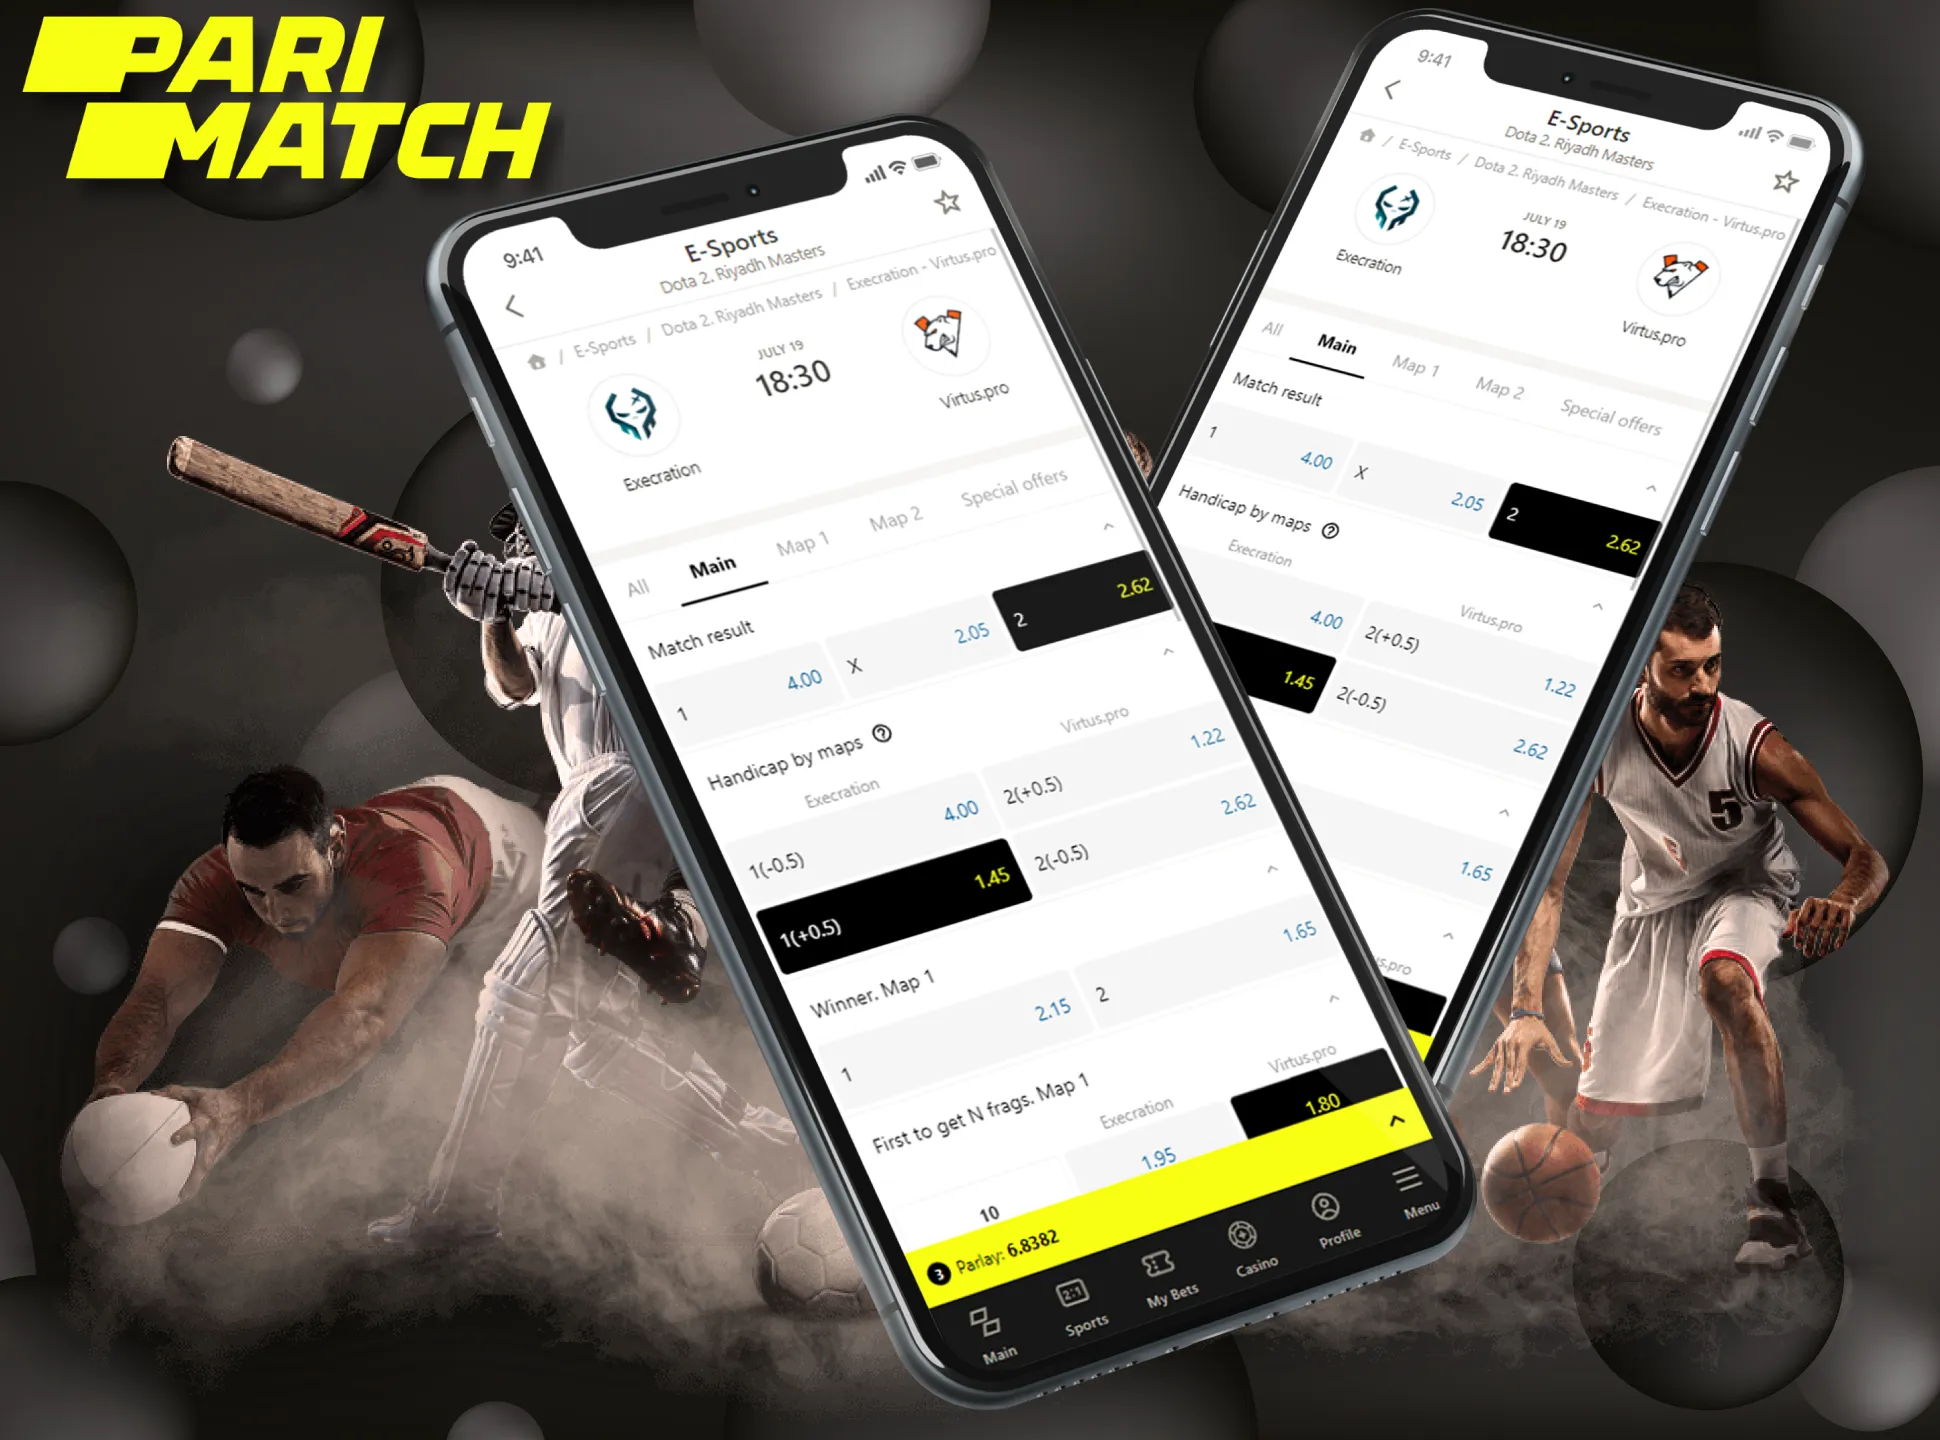 You can place different types of bets in the Parimatch app.